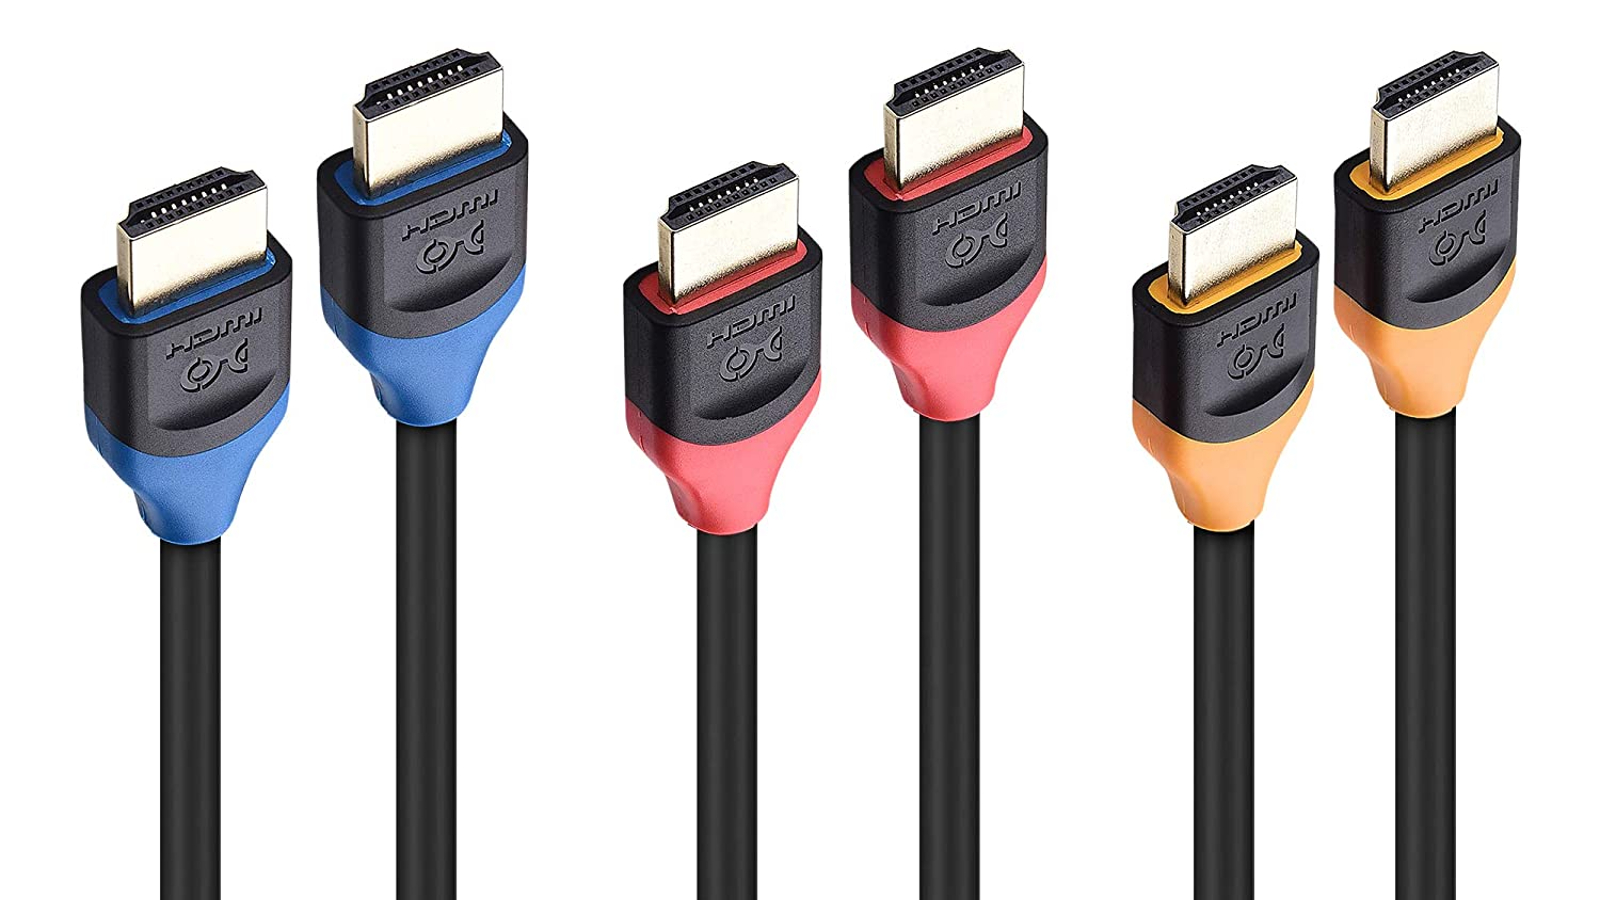 Cable Matters 3-pack of HDMI Cables - Best HDMI cable multipack